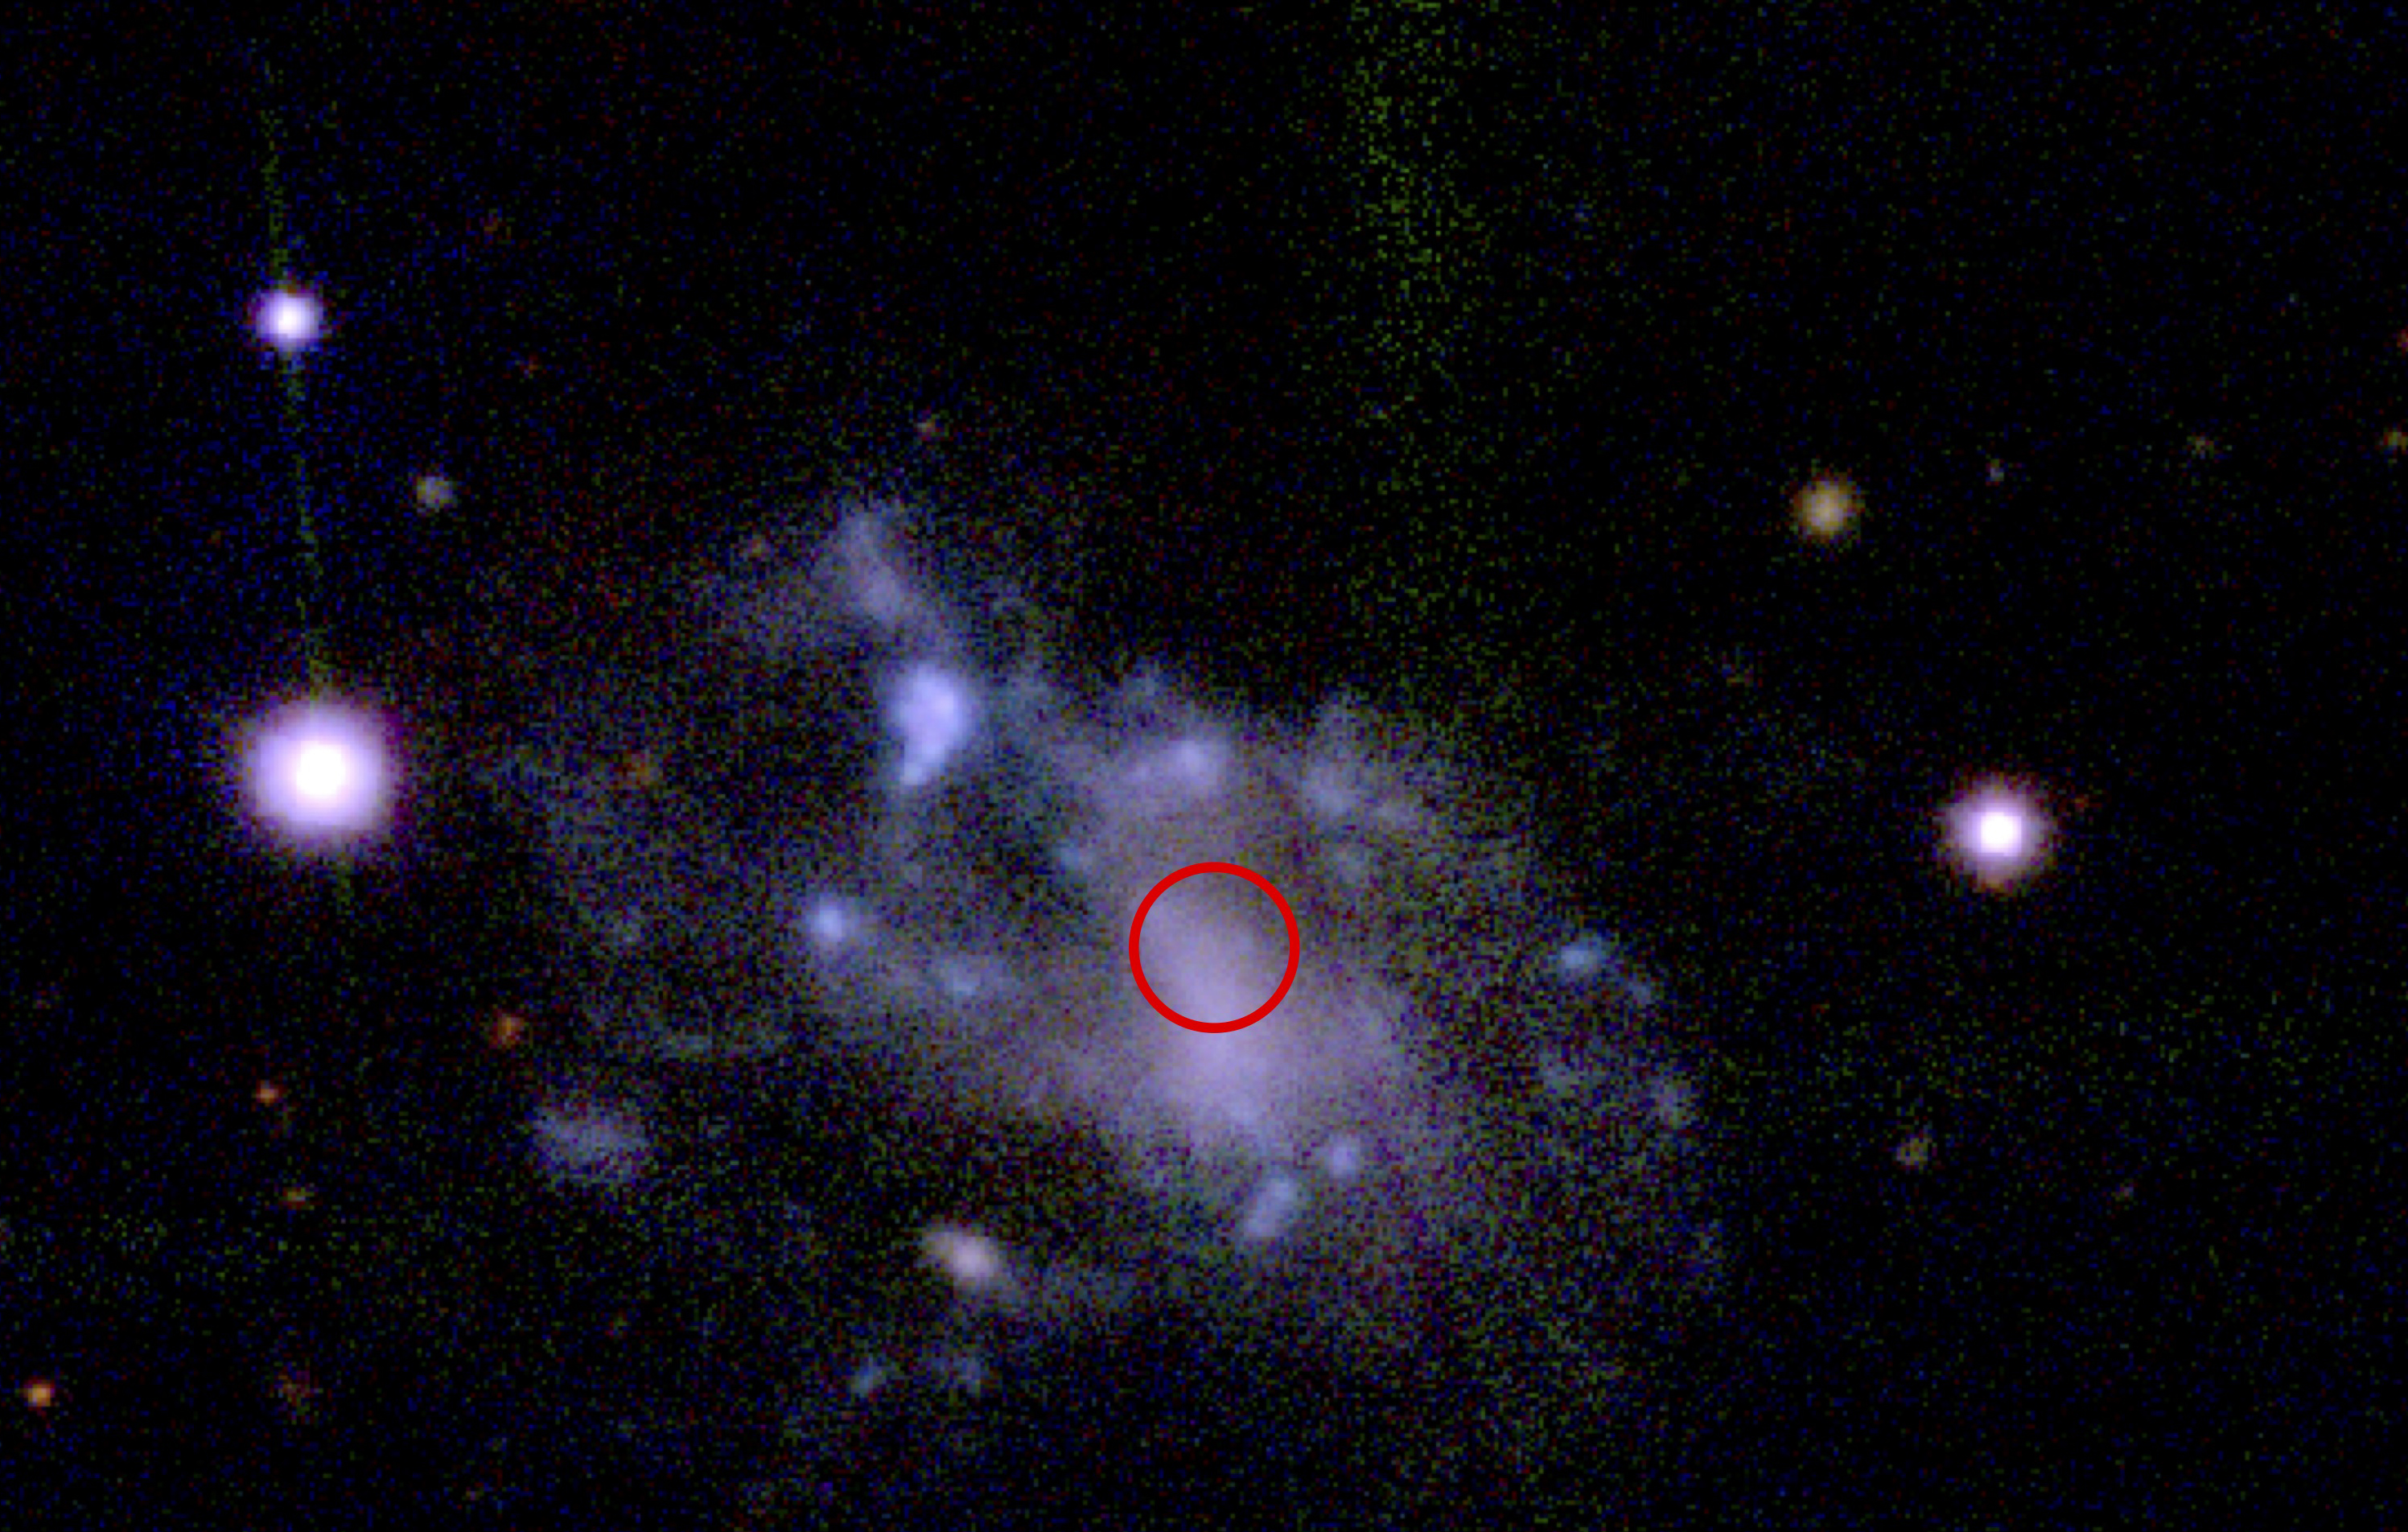 Pan-STARRS image showing the host galaxy of the newly discovered supernova ASASSN-18bt